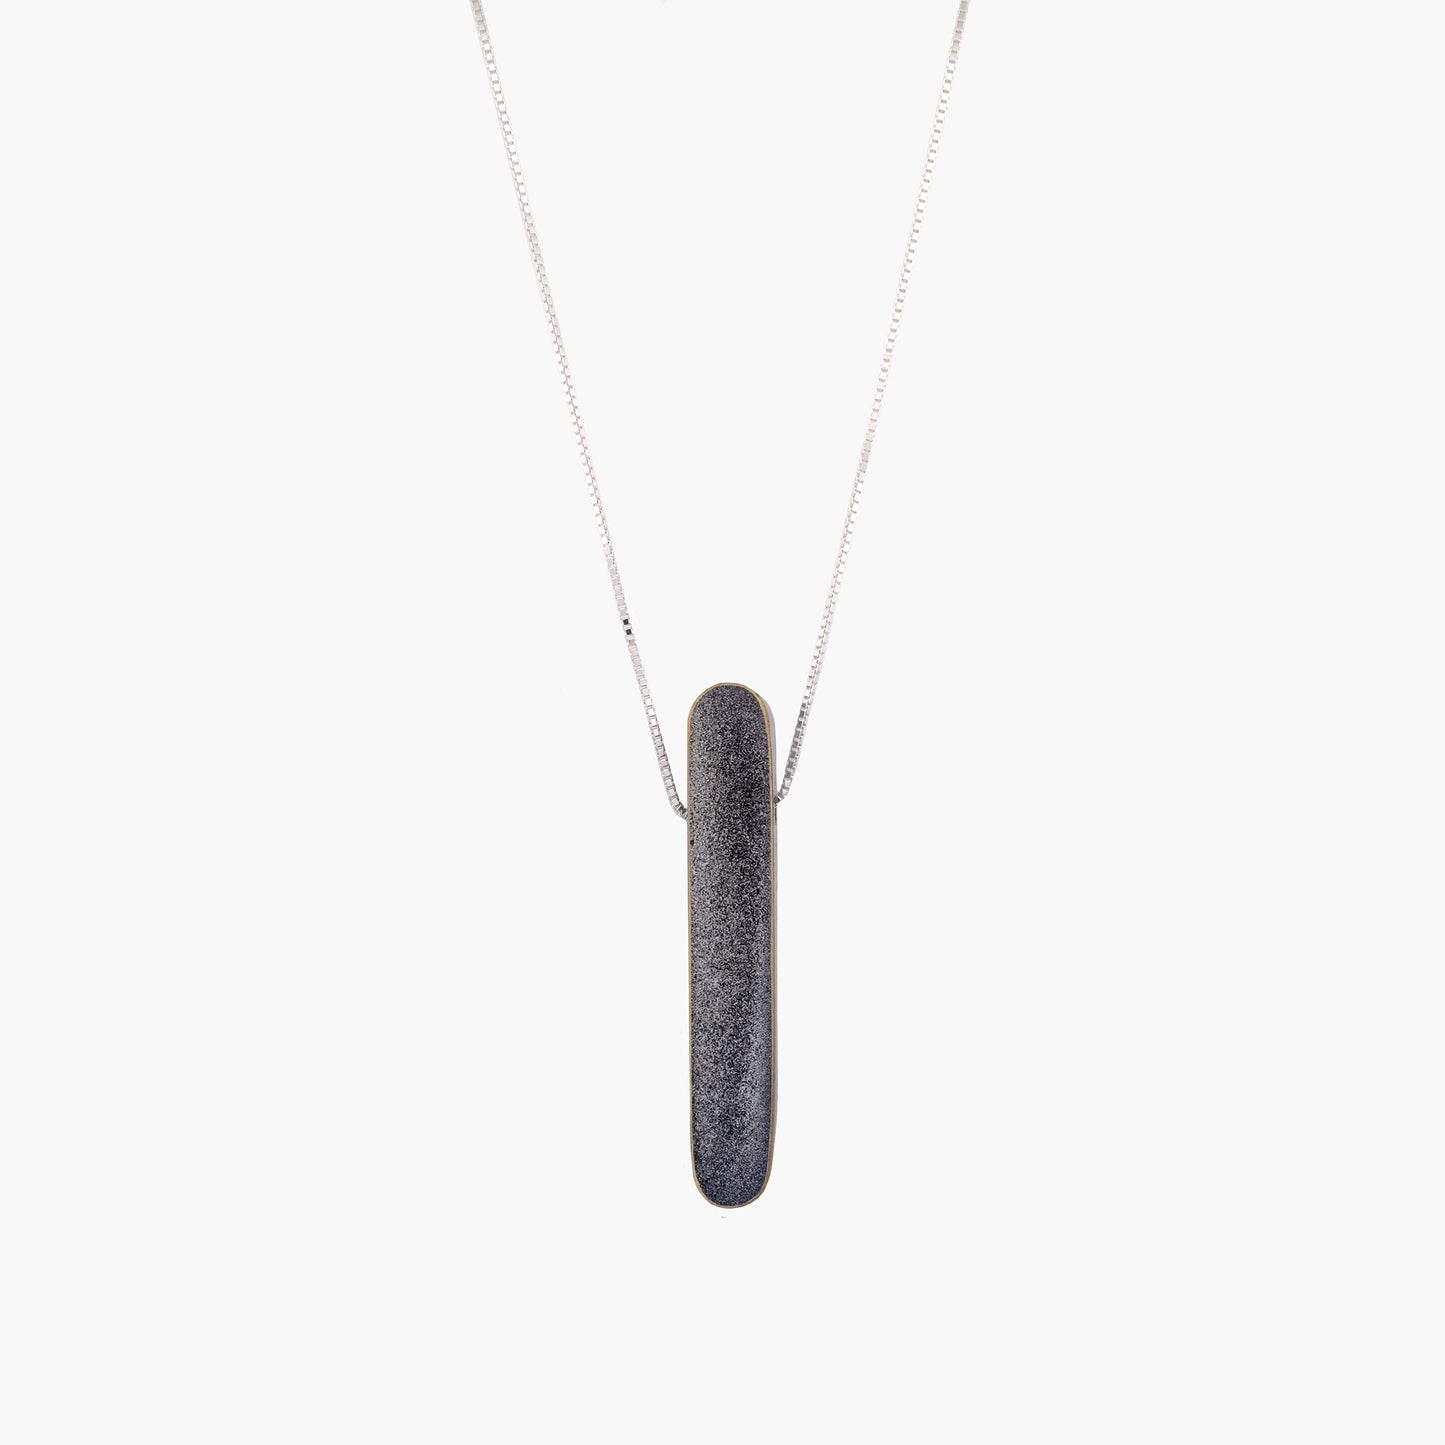 Long Rounded Component necklace